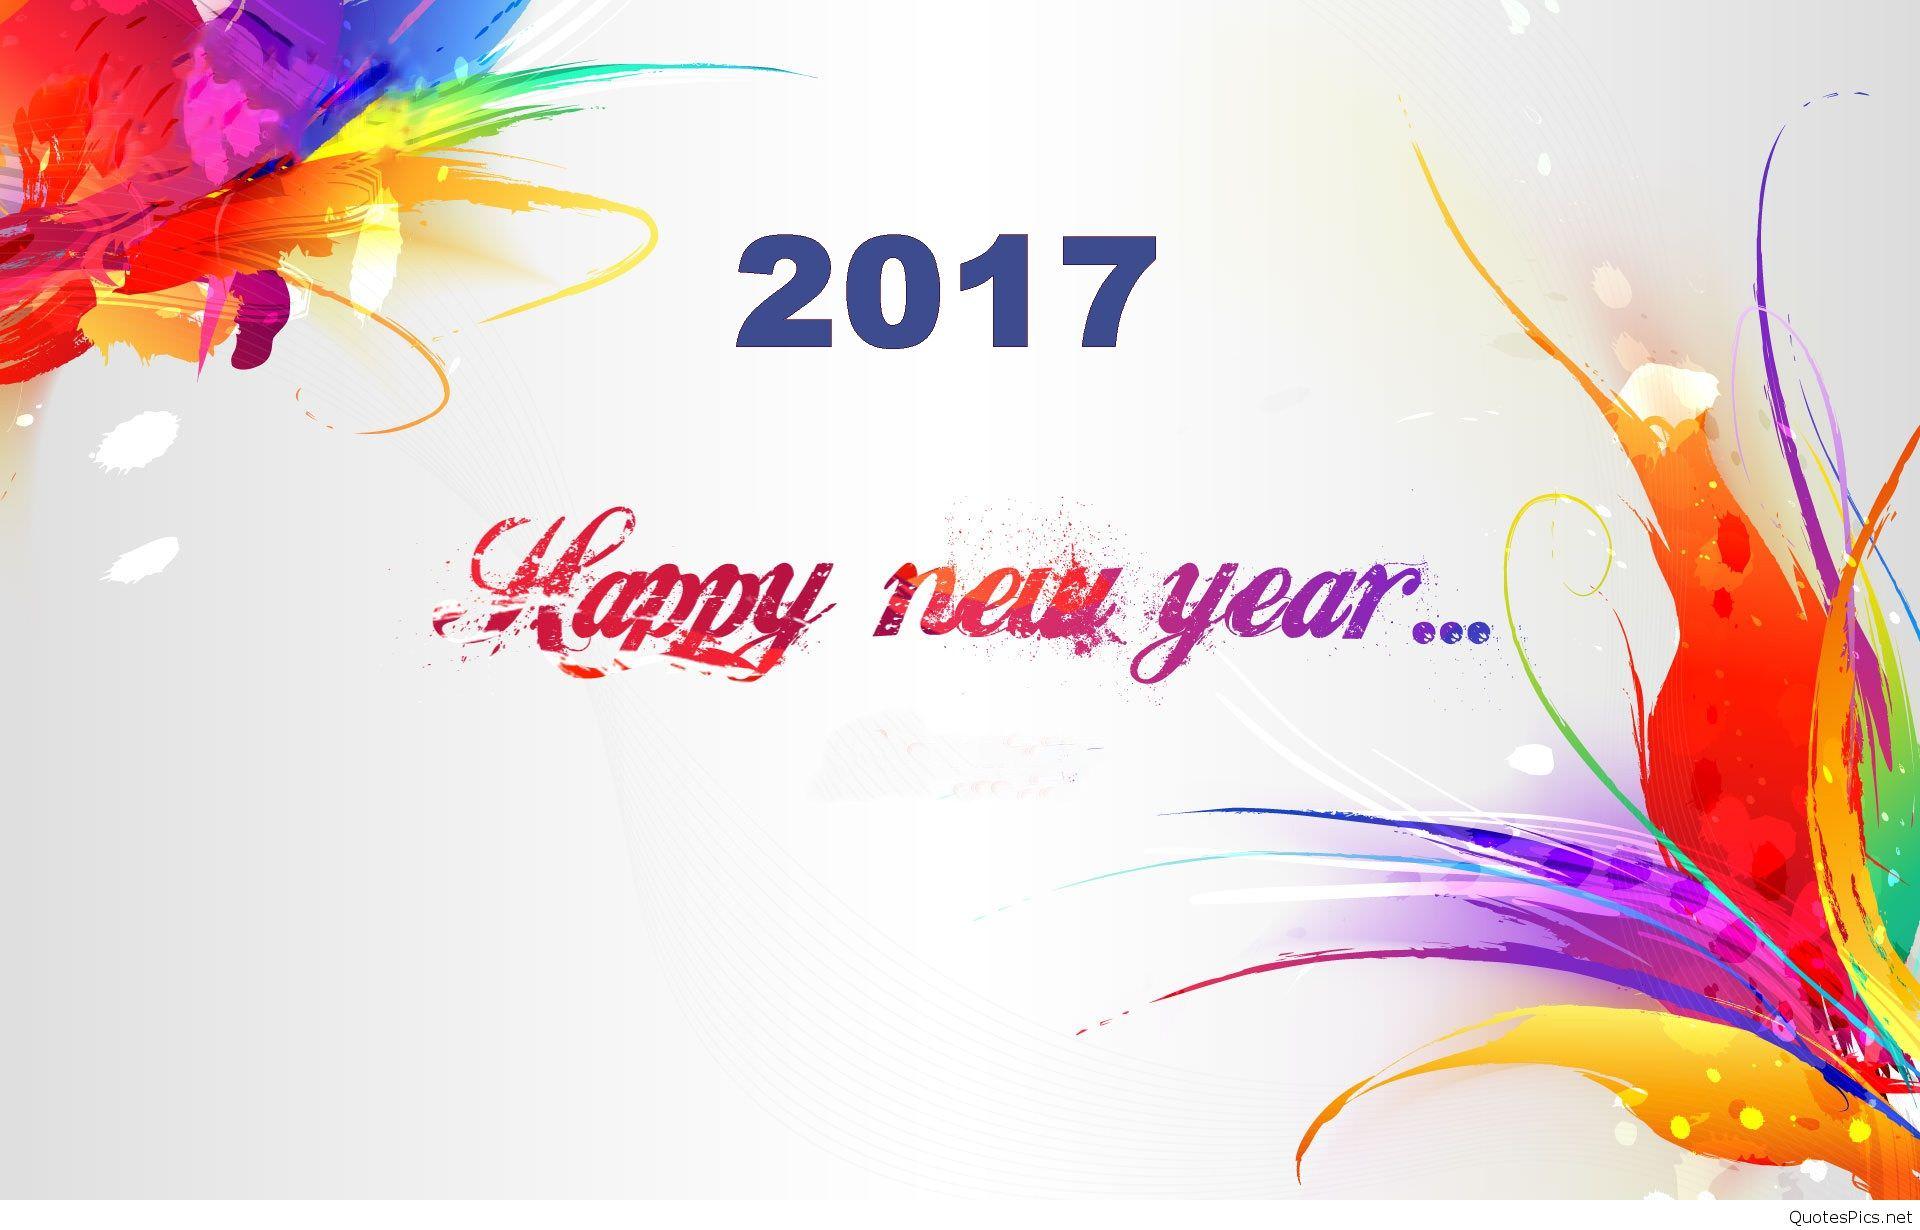 New Year 2017 Wallpaper & HD Background Image Free Download. Nov